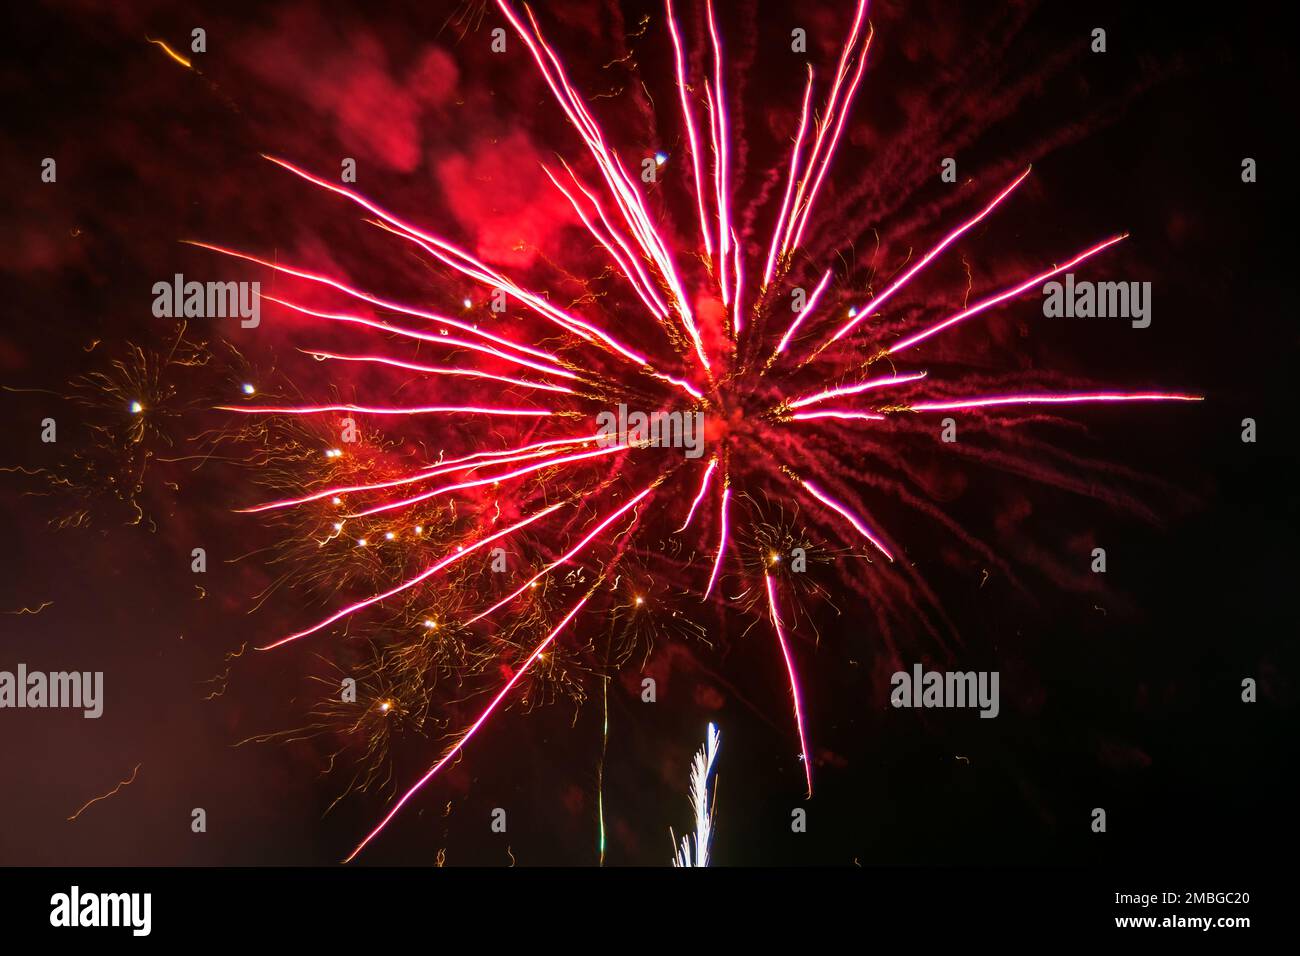 Fireworks in the night sky. Thousands of exploding colors and lights tear the sky. Stock Photo